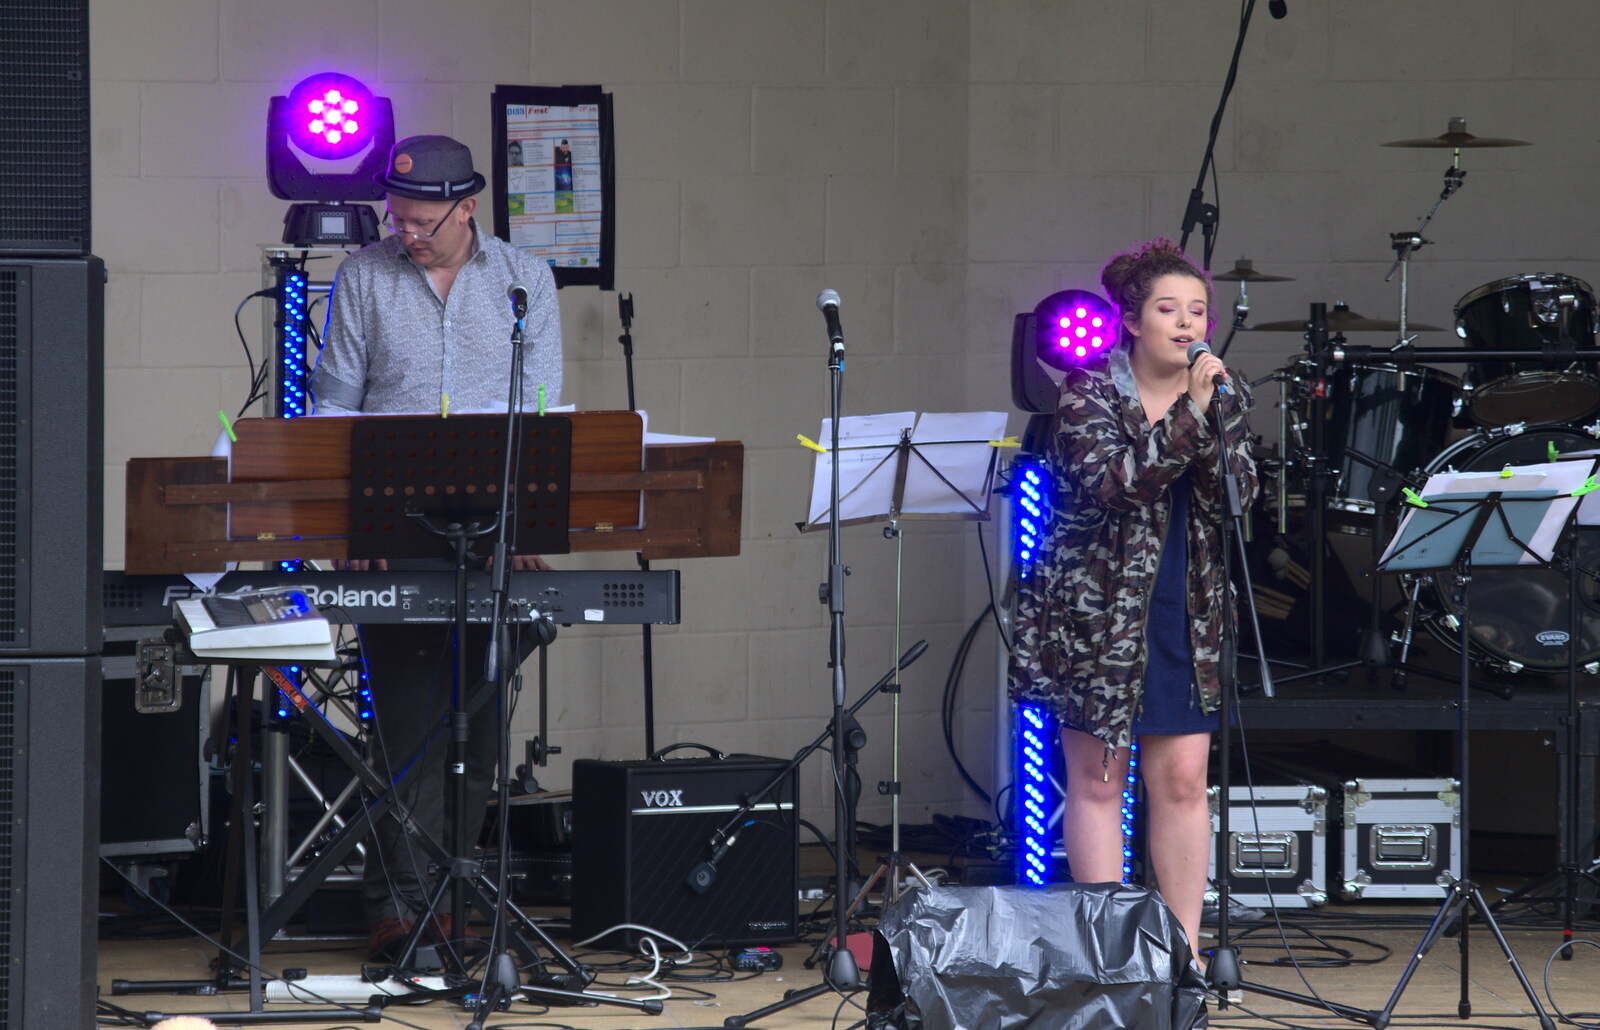 Keyboard and vocals from Diss Fest, or Singin' in the Rain, Diss, Norfolk - 23rd July 2017